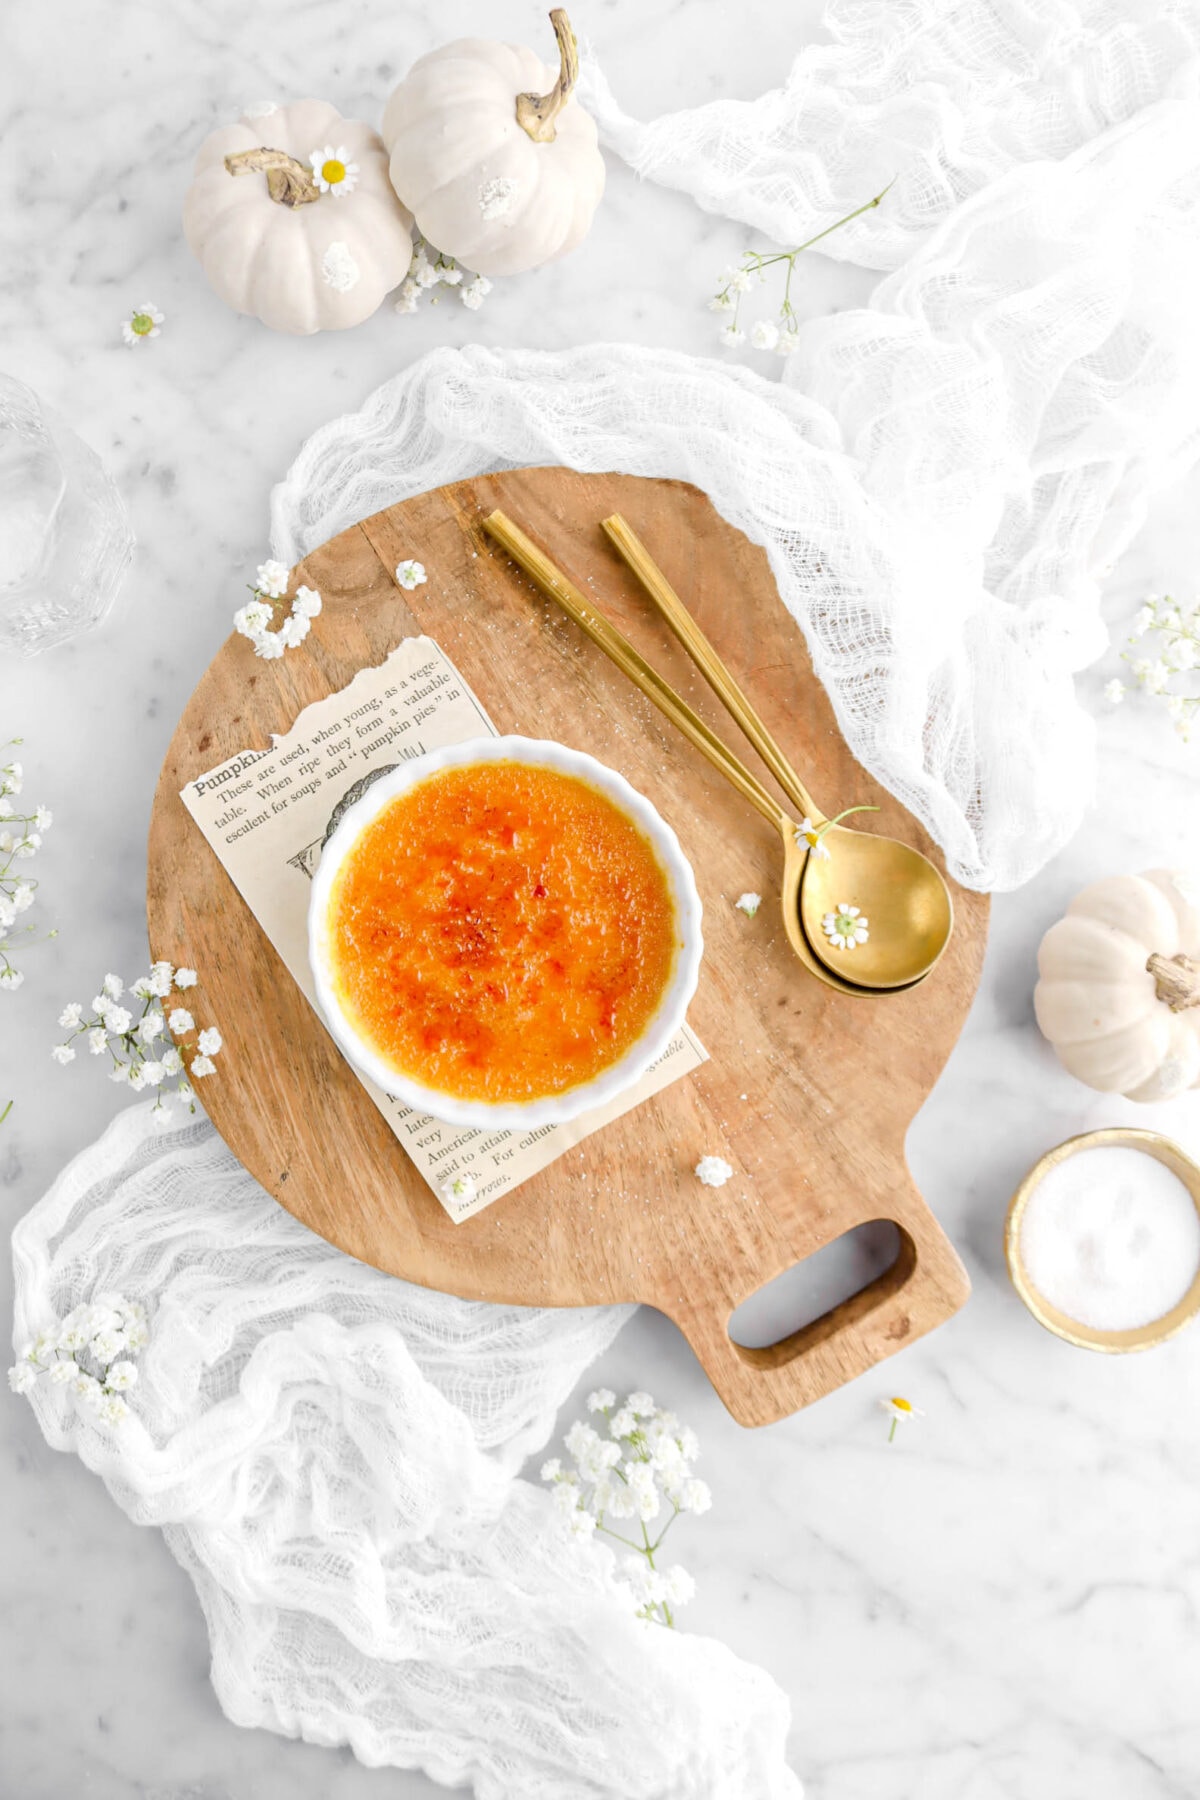 creme brûlée on wood board with book page and two gold spoons beside, with white cheesecloth, and white pumpkins on marble surface.